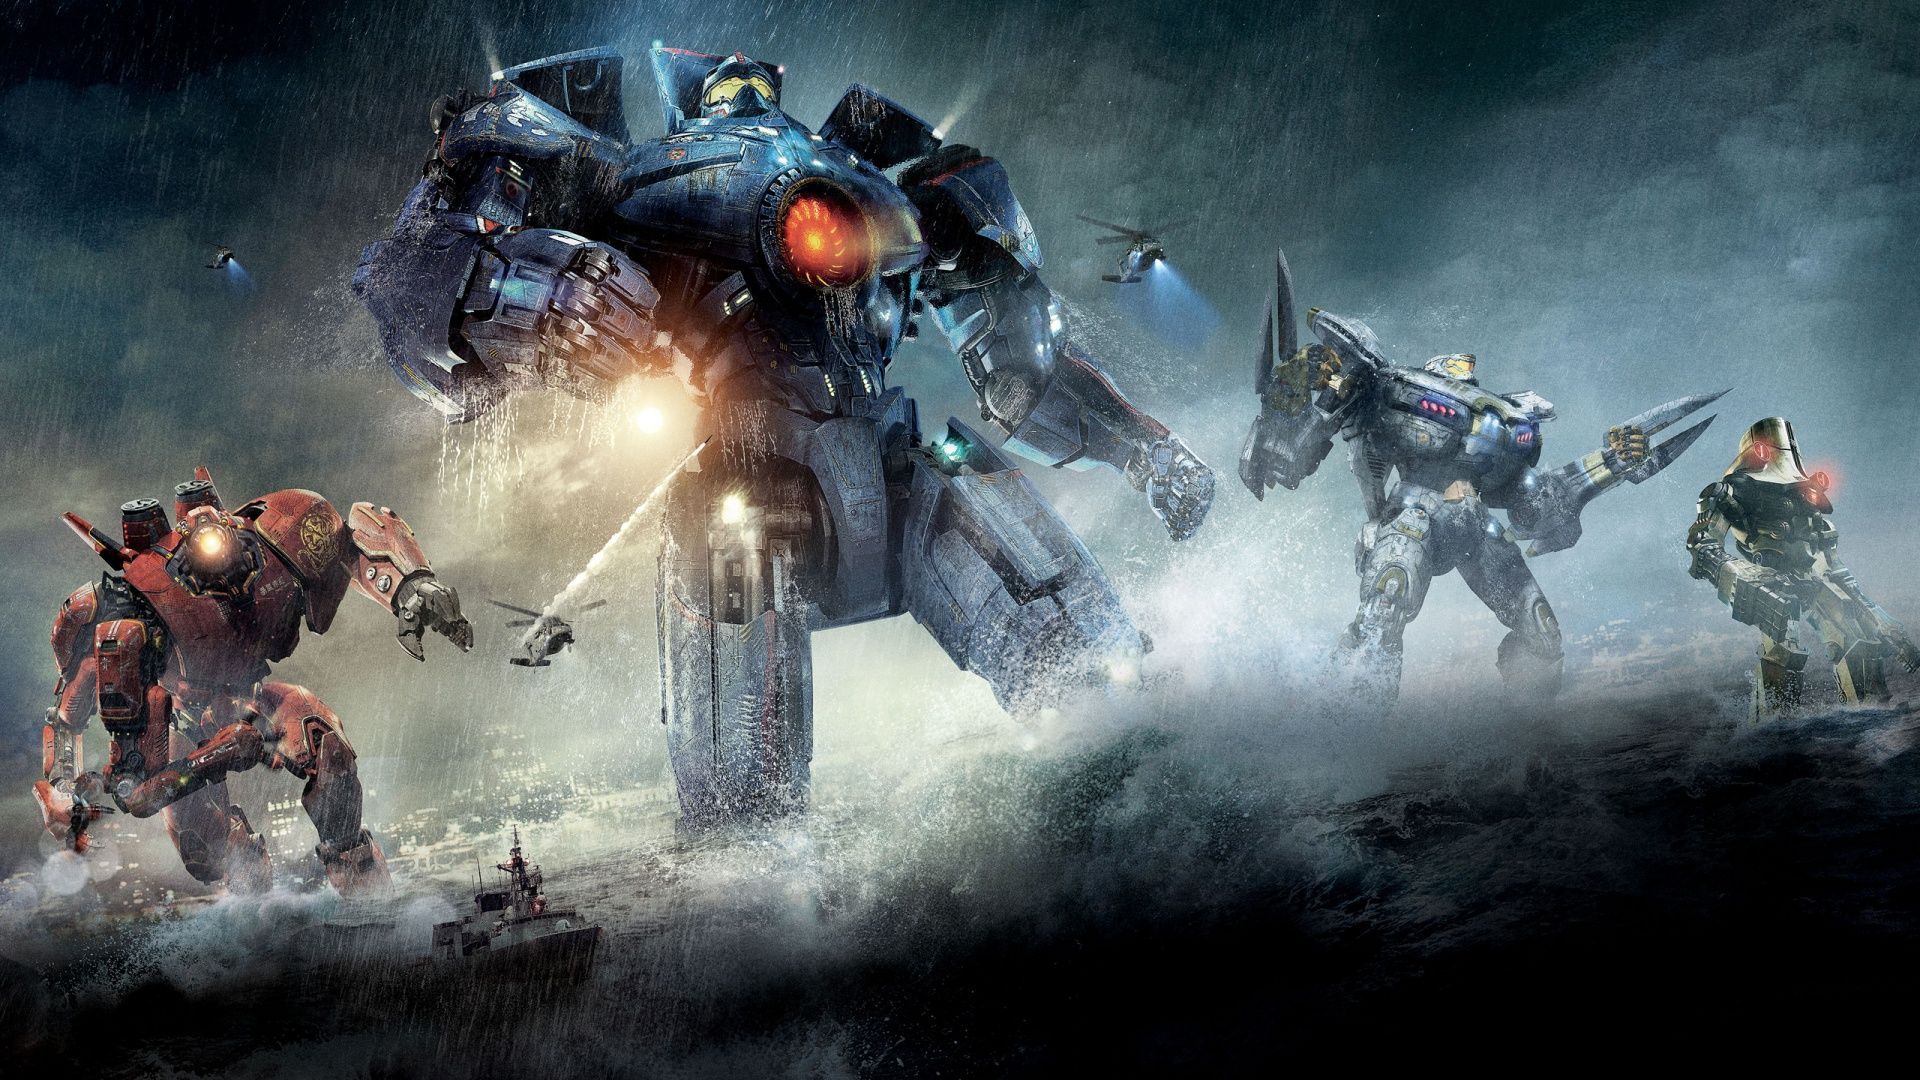 The four main Jeagers from Pacific Rim